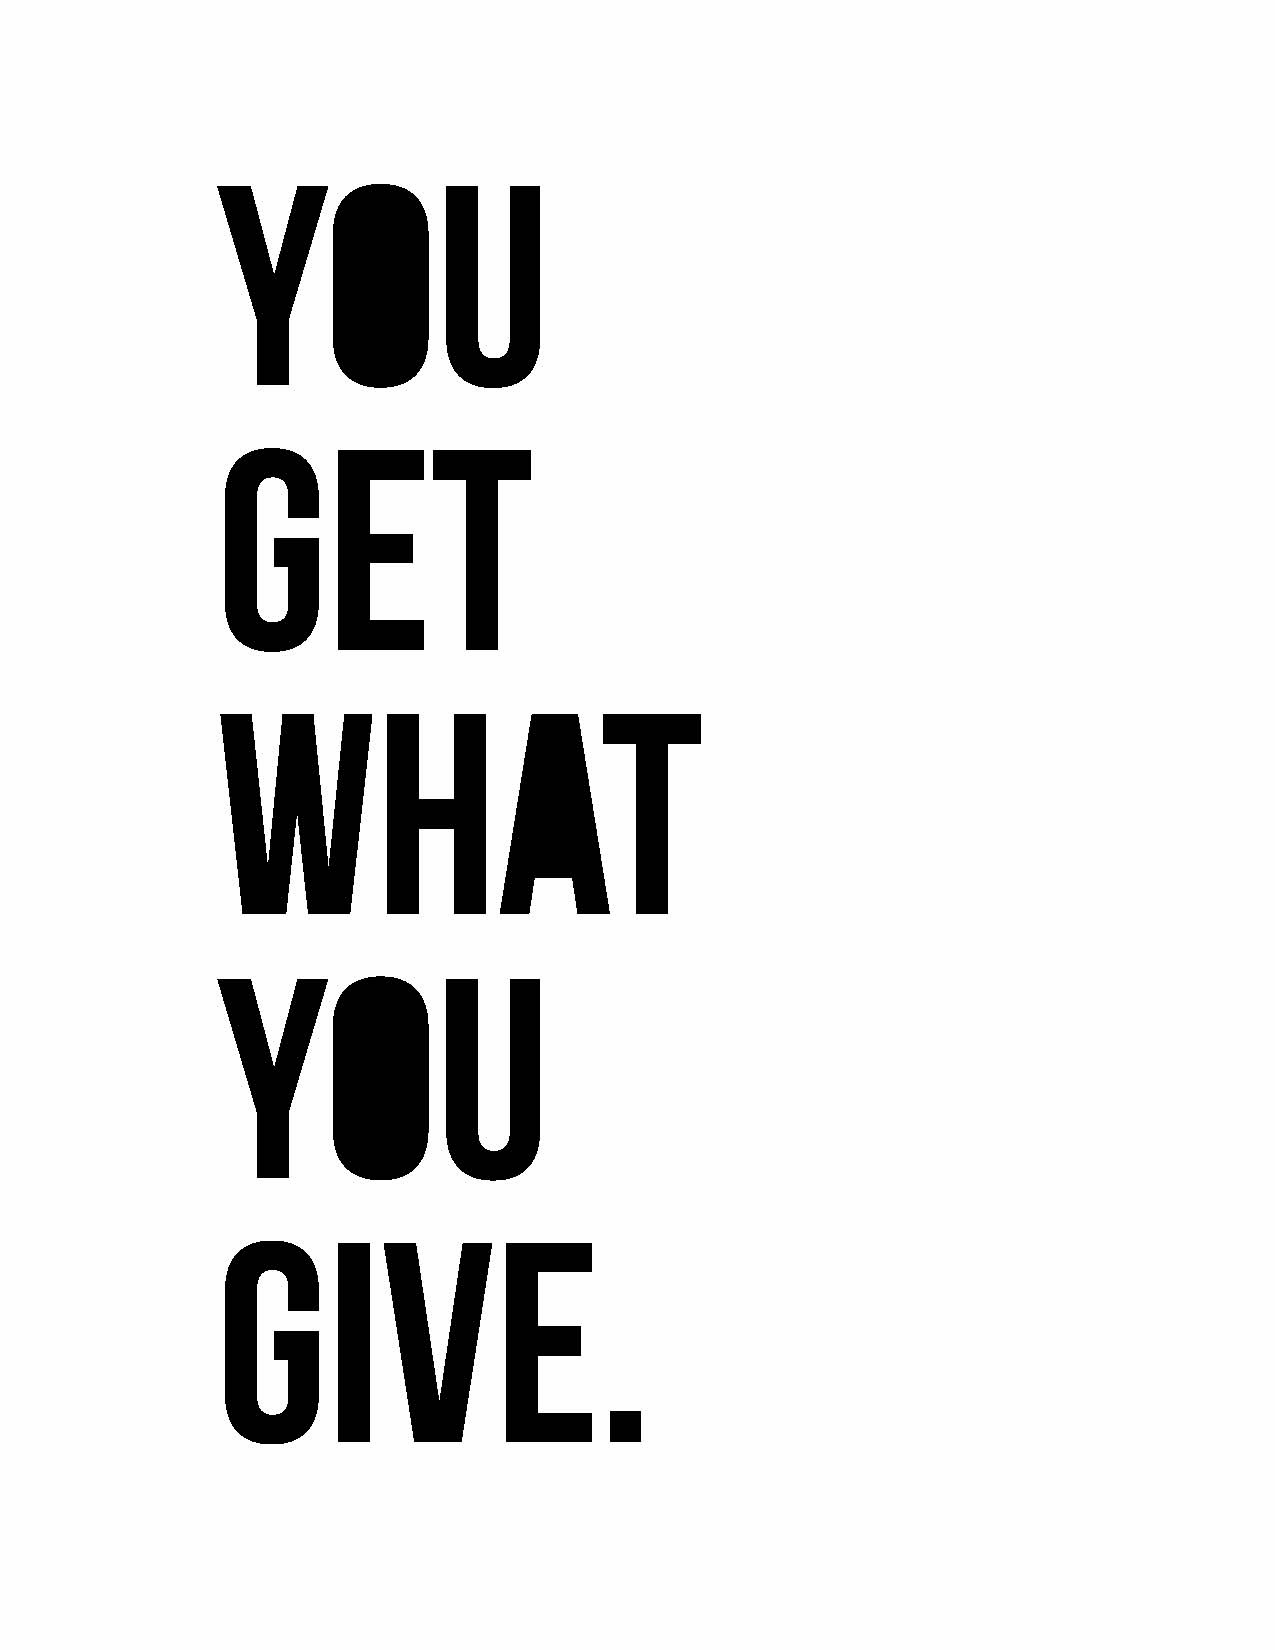 You Get What You Give